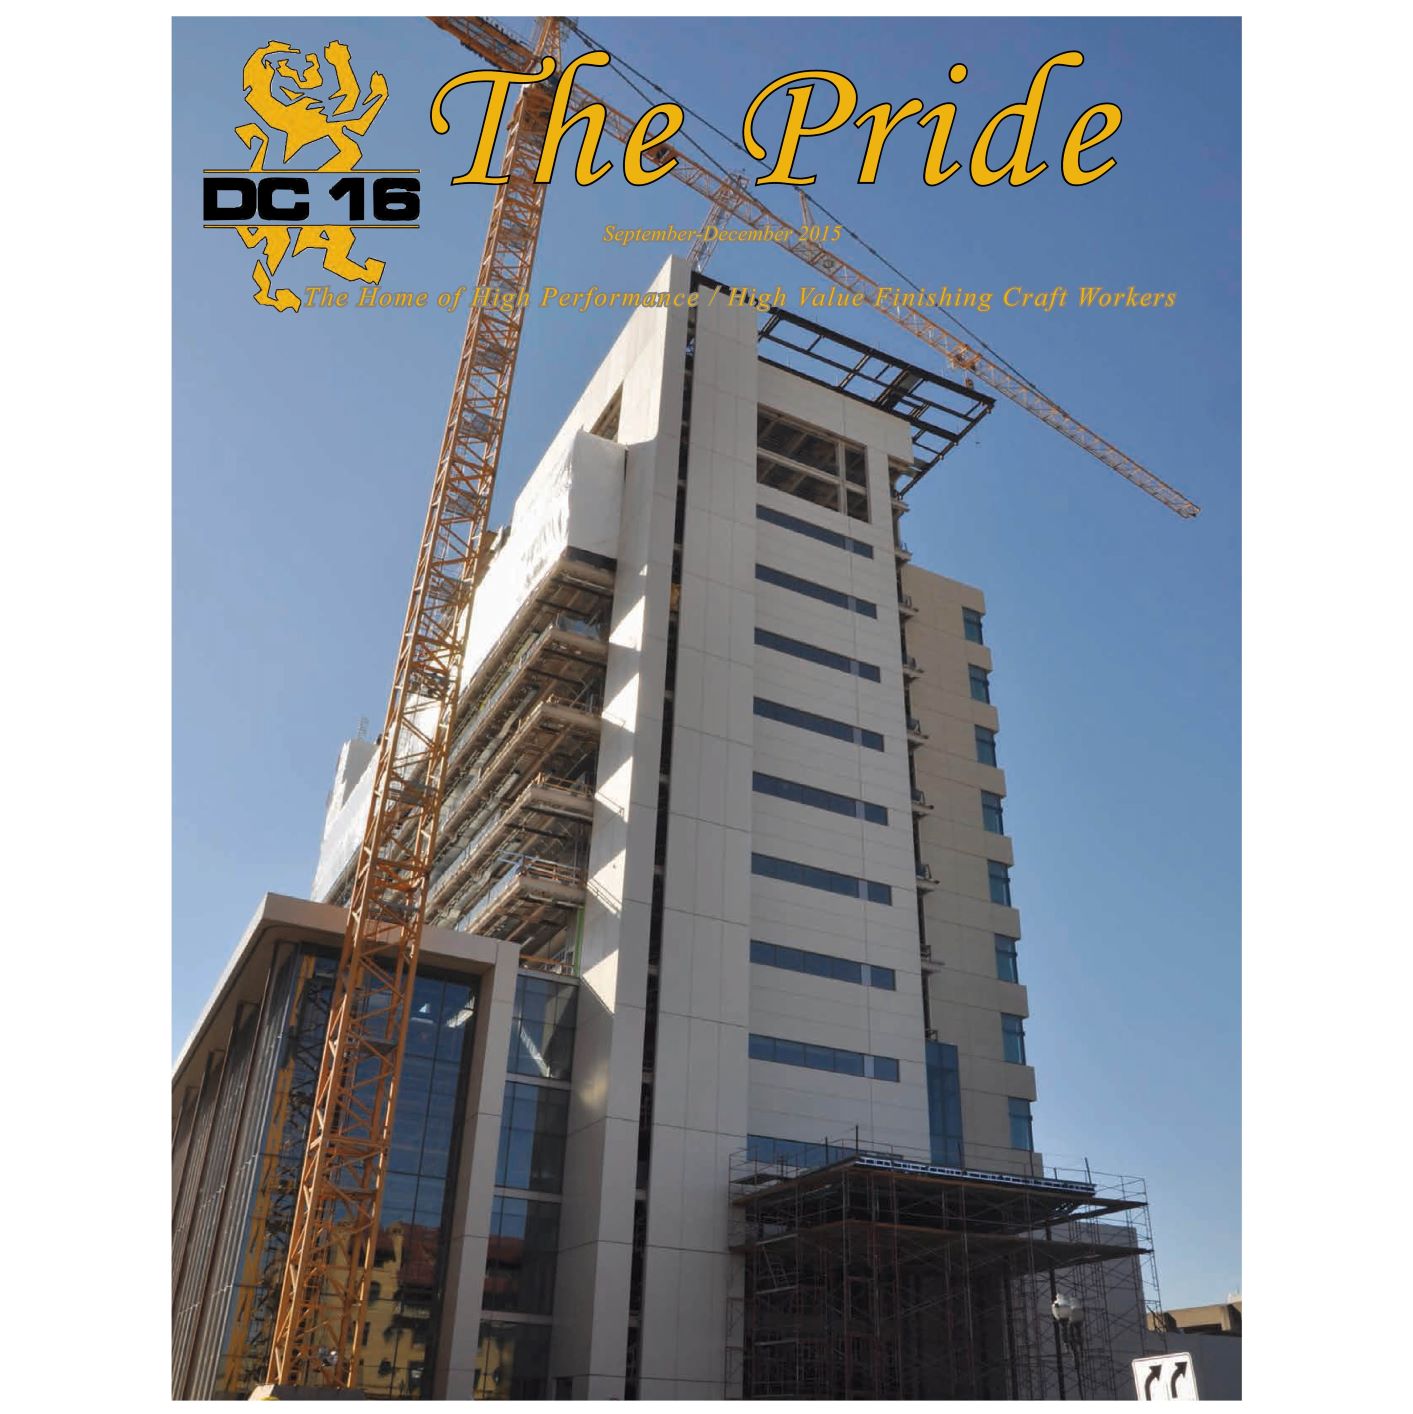 Image from the Gallery: THE PRIDE SEPTEMBER – DECEMBER 2015